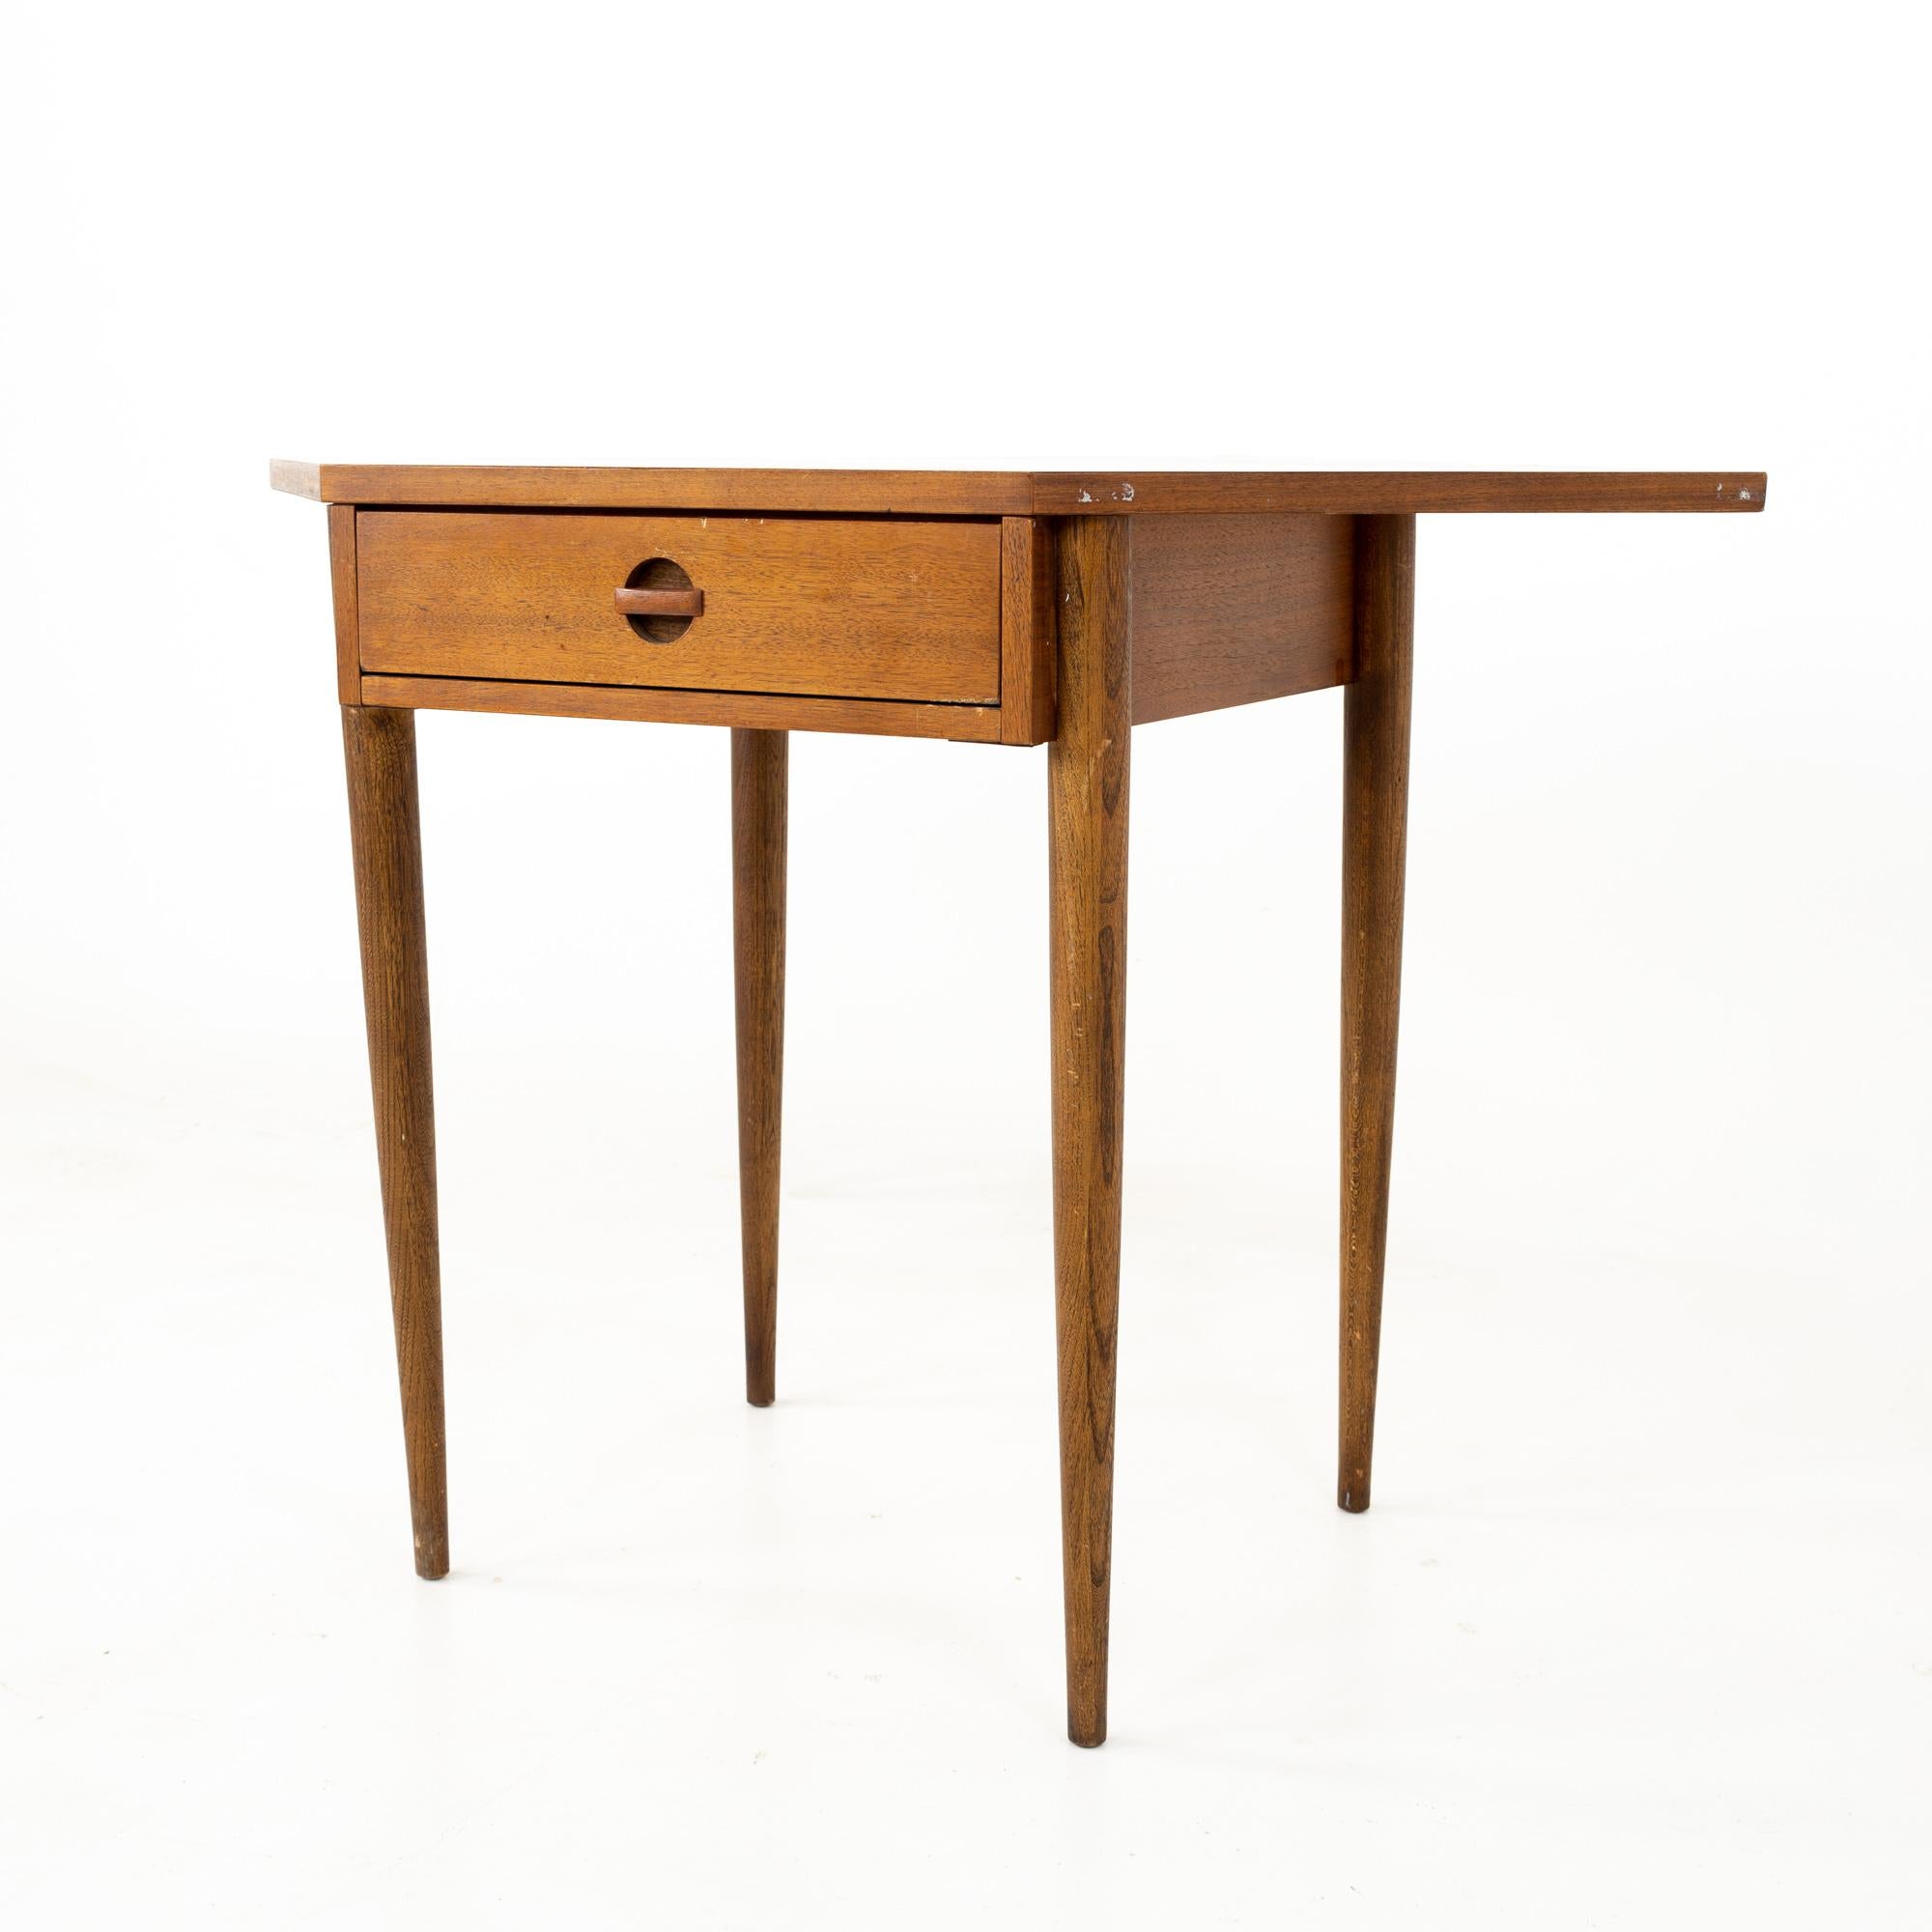 Bassett mid century walnut corner table desk
This desk is 32 wide x 35.5 deep x 30 inches high

All pieces of furniture can be had in what we call restored vintage condition. That means the piece is restored upon purchase so it’s free of